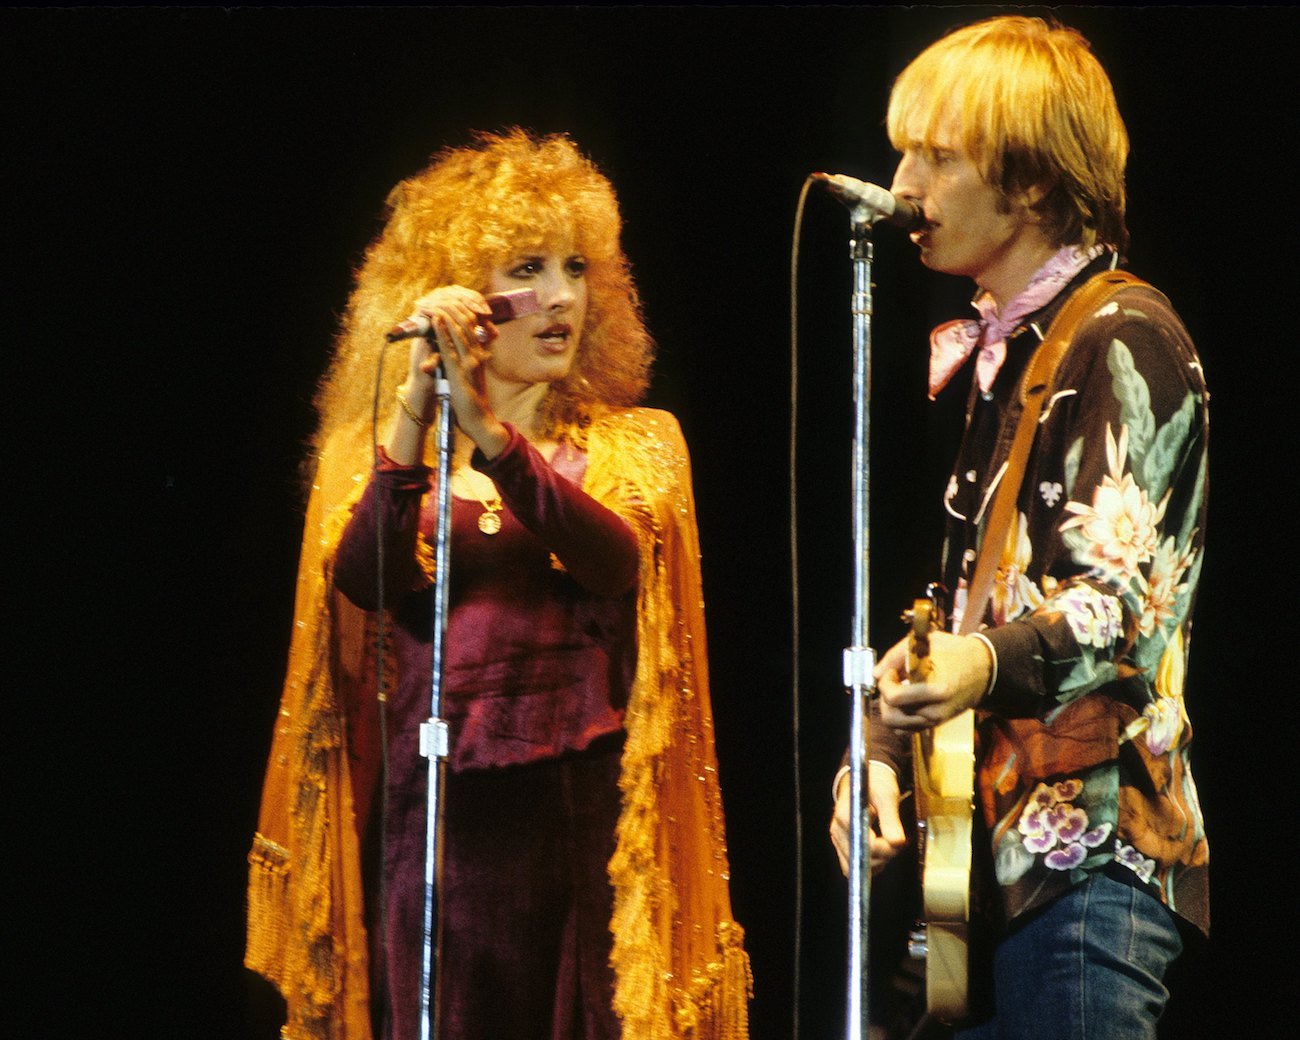 Stevie Nicks and Tom Petty performing together in 1981.